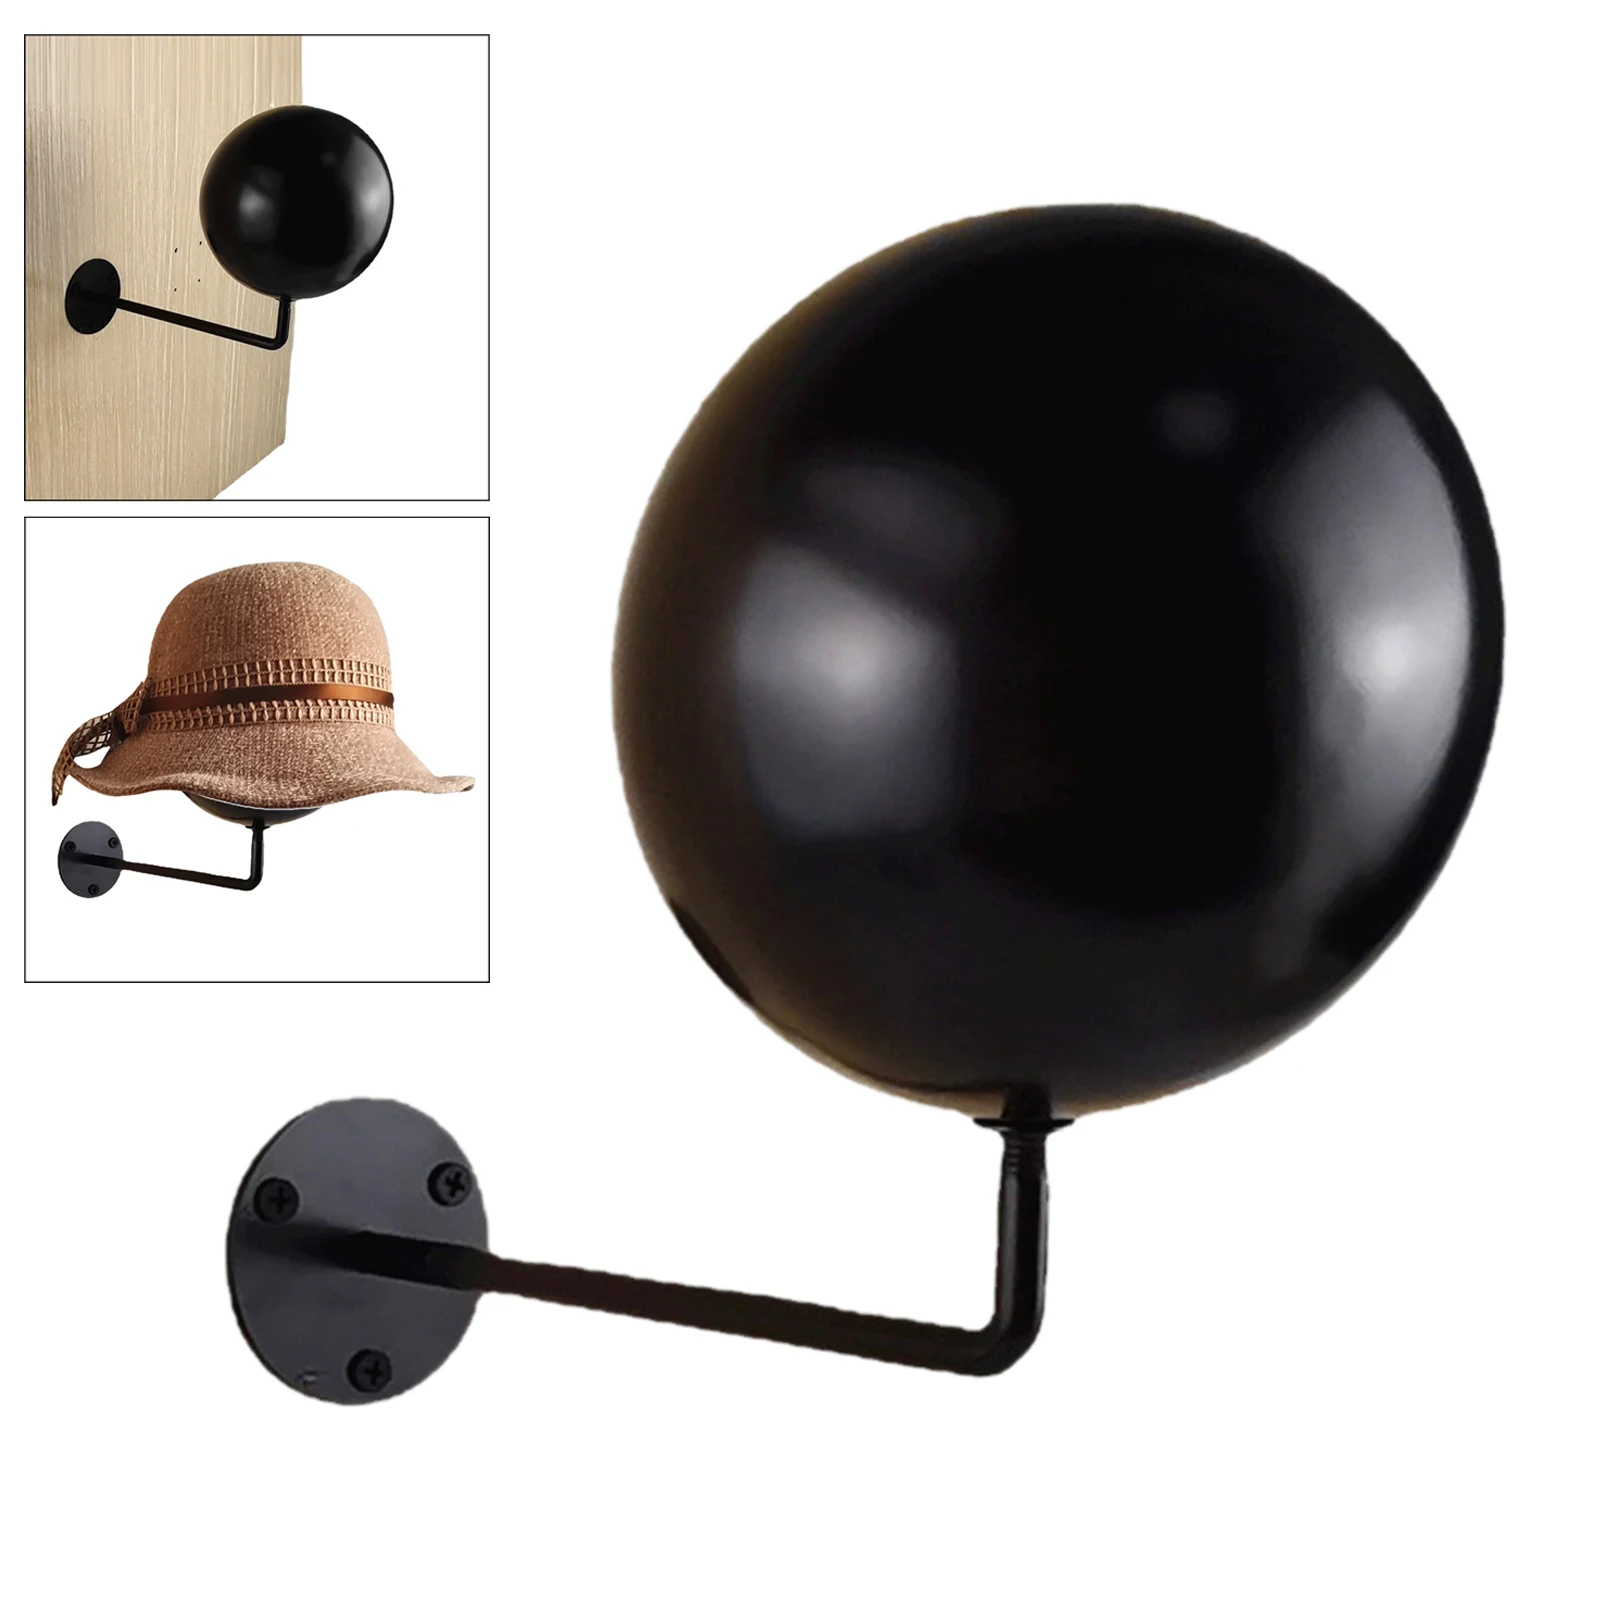 Durable Metal Wig Stand for Wigs, Hats, Bags, Clothing, Motorcycle Helmet H anger Holder Hook Black Save Space17.5x5cm